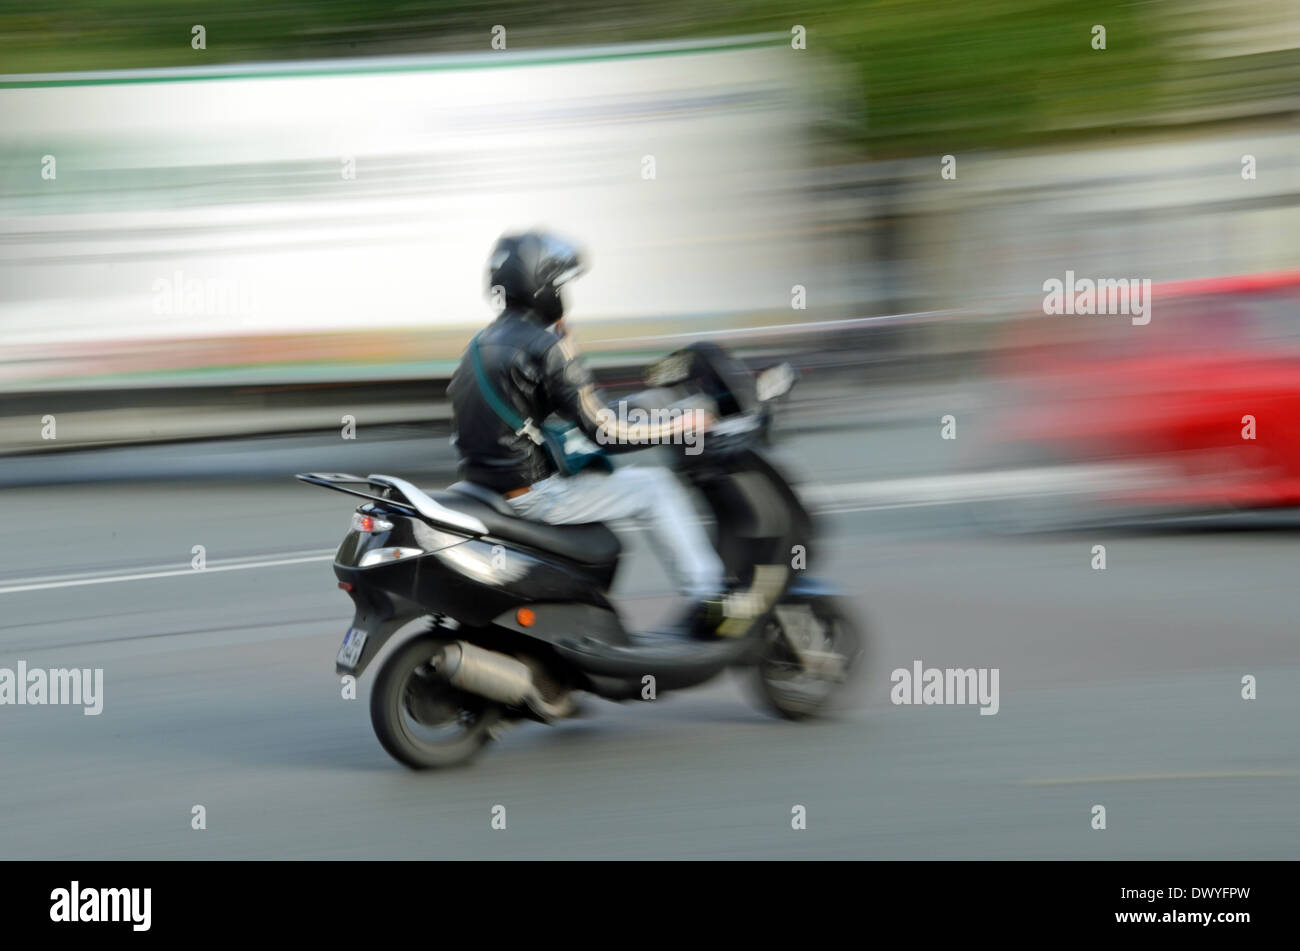 A scooter driver in the city. Stock Photo